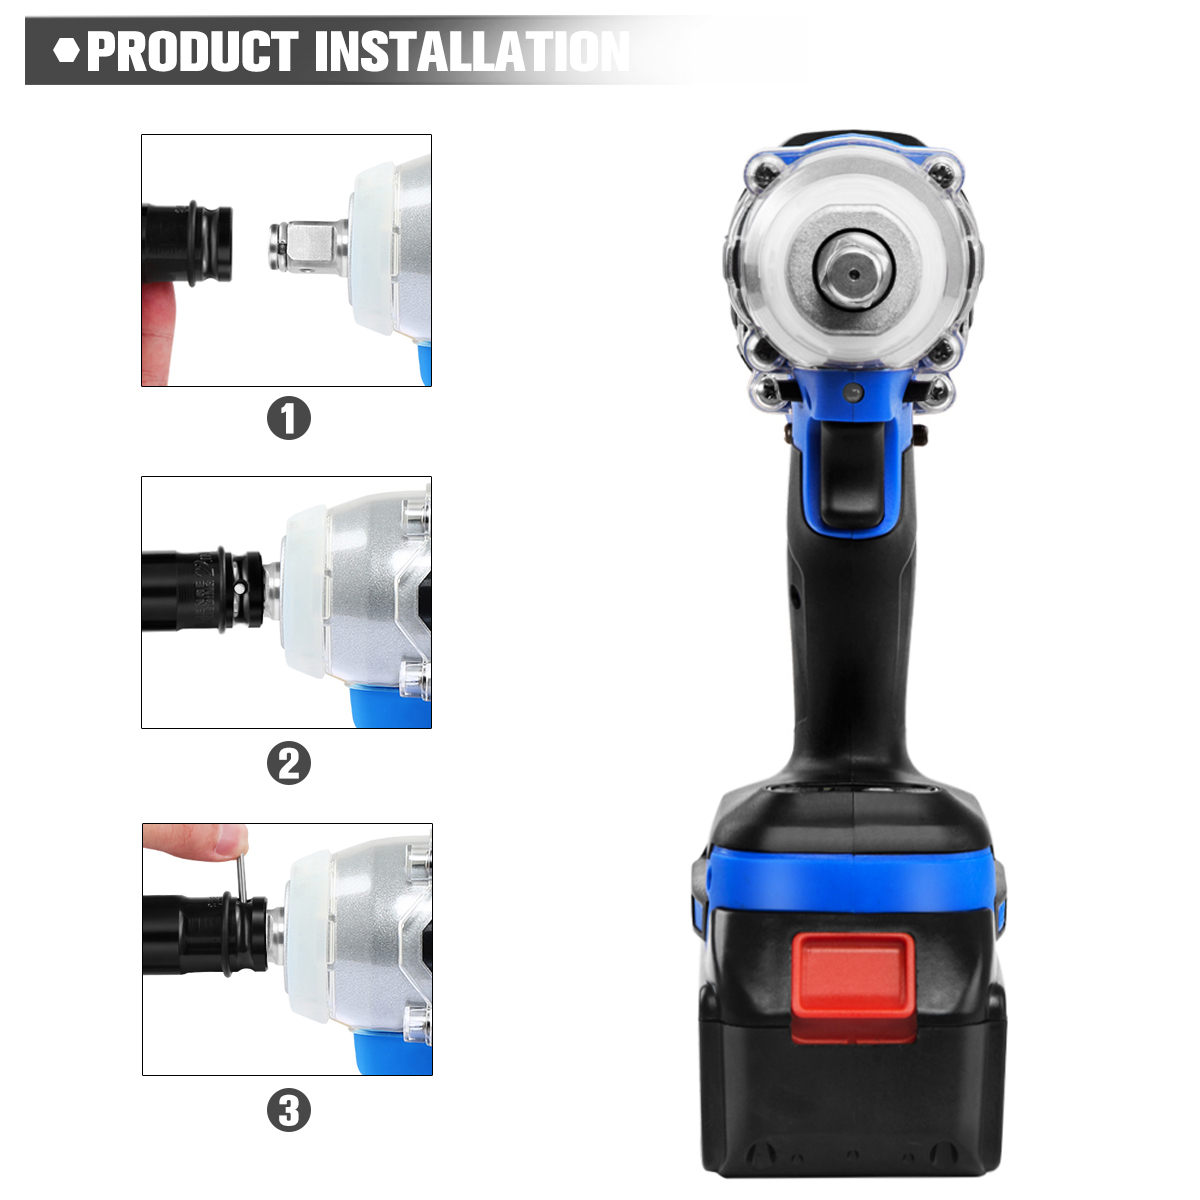 21V Impact Wrench Brushless Cordless Electric Wrench Power Tool 320N.m Torque Rechargeable Extra Battery Avaliable By PROSTORMER